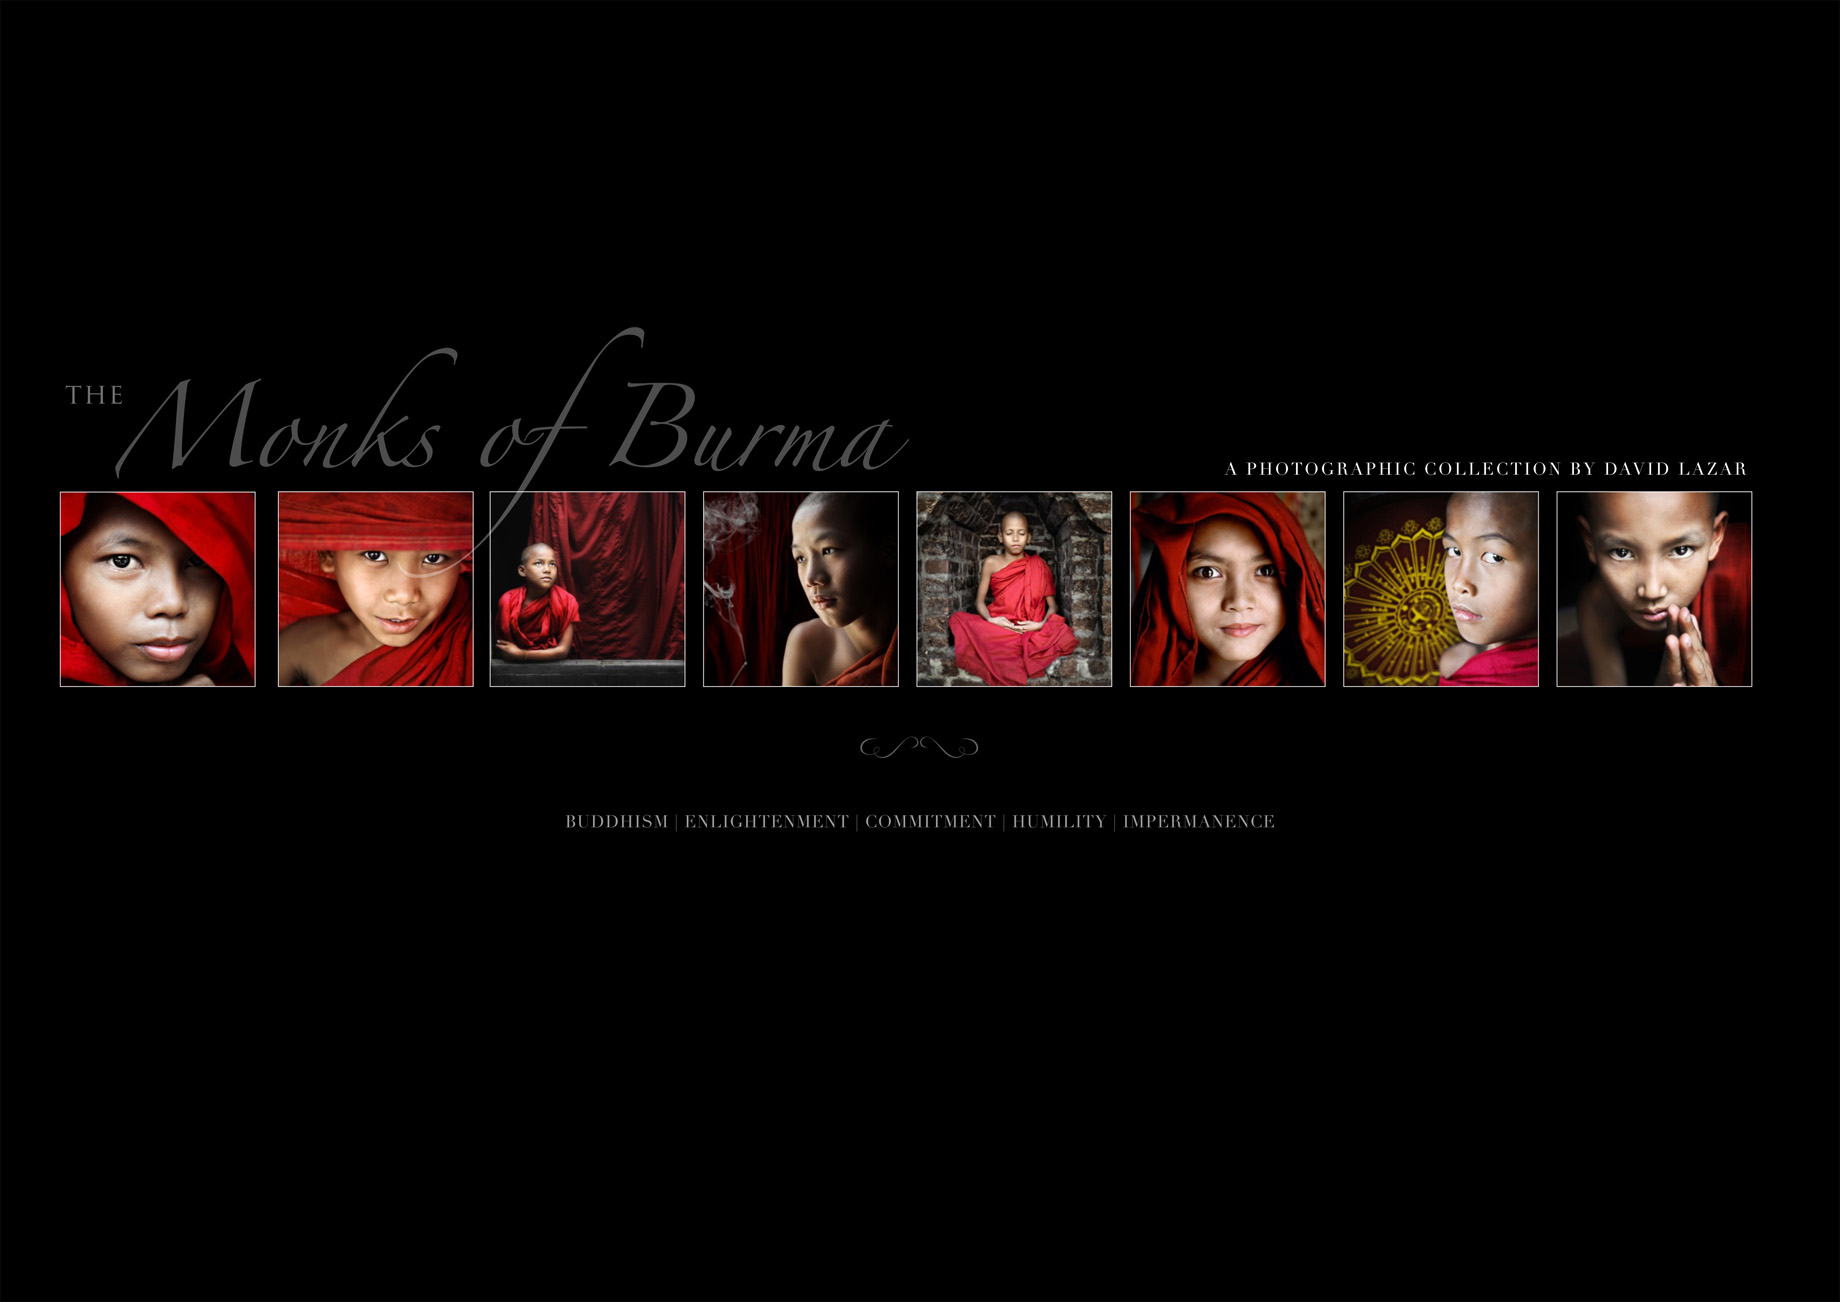 monks-of-burma-feature-pages-black.jpg